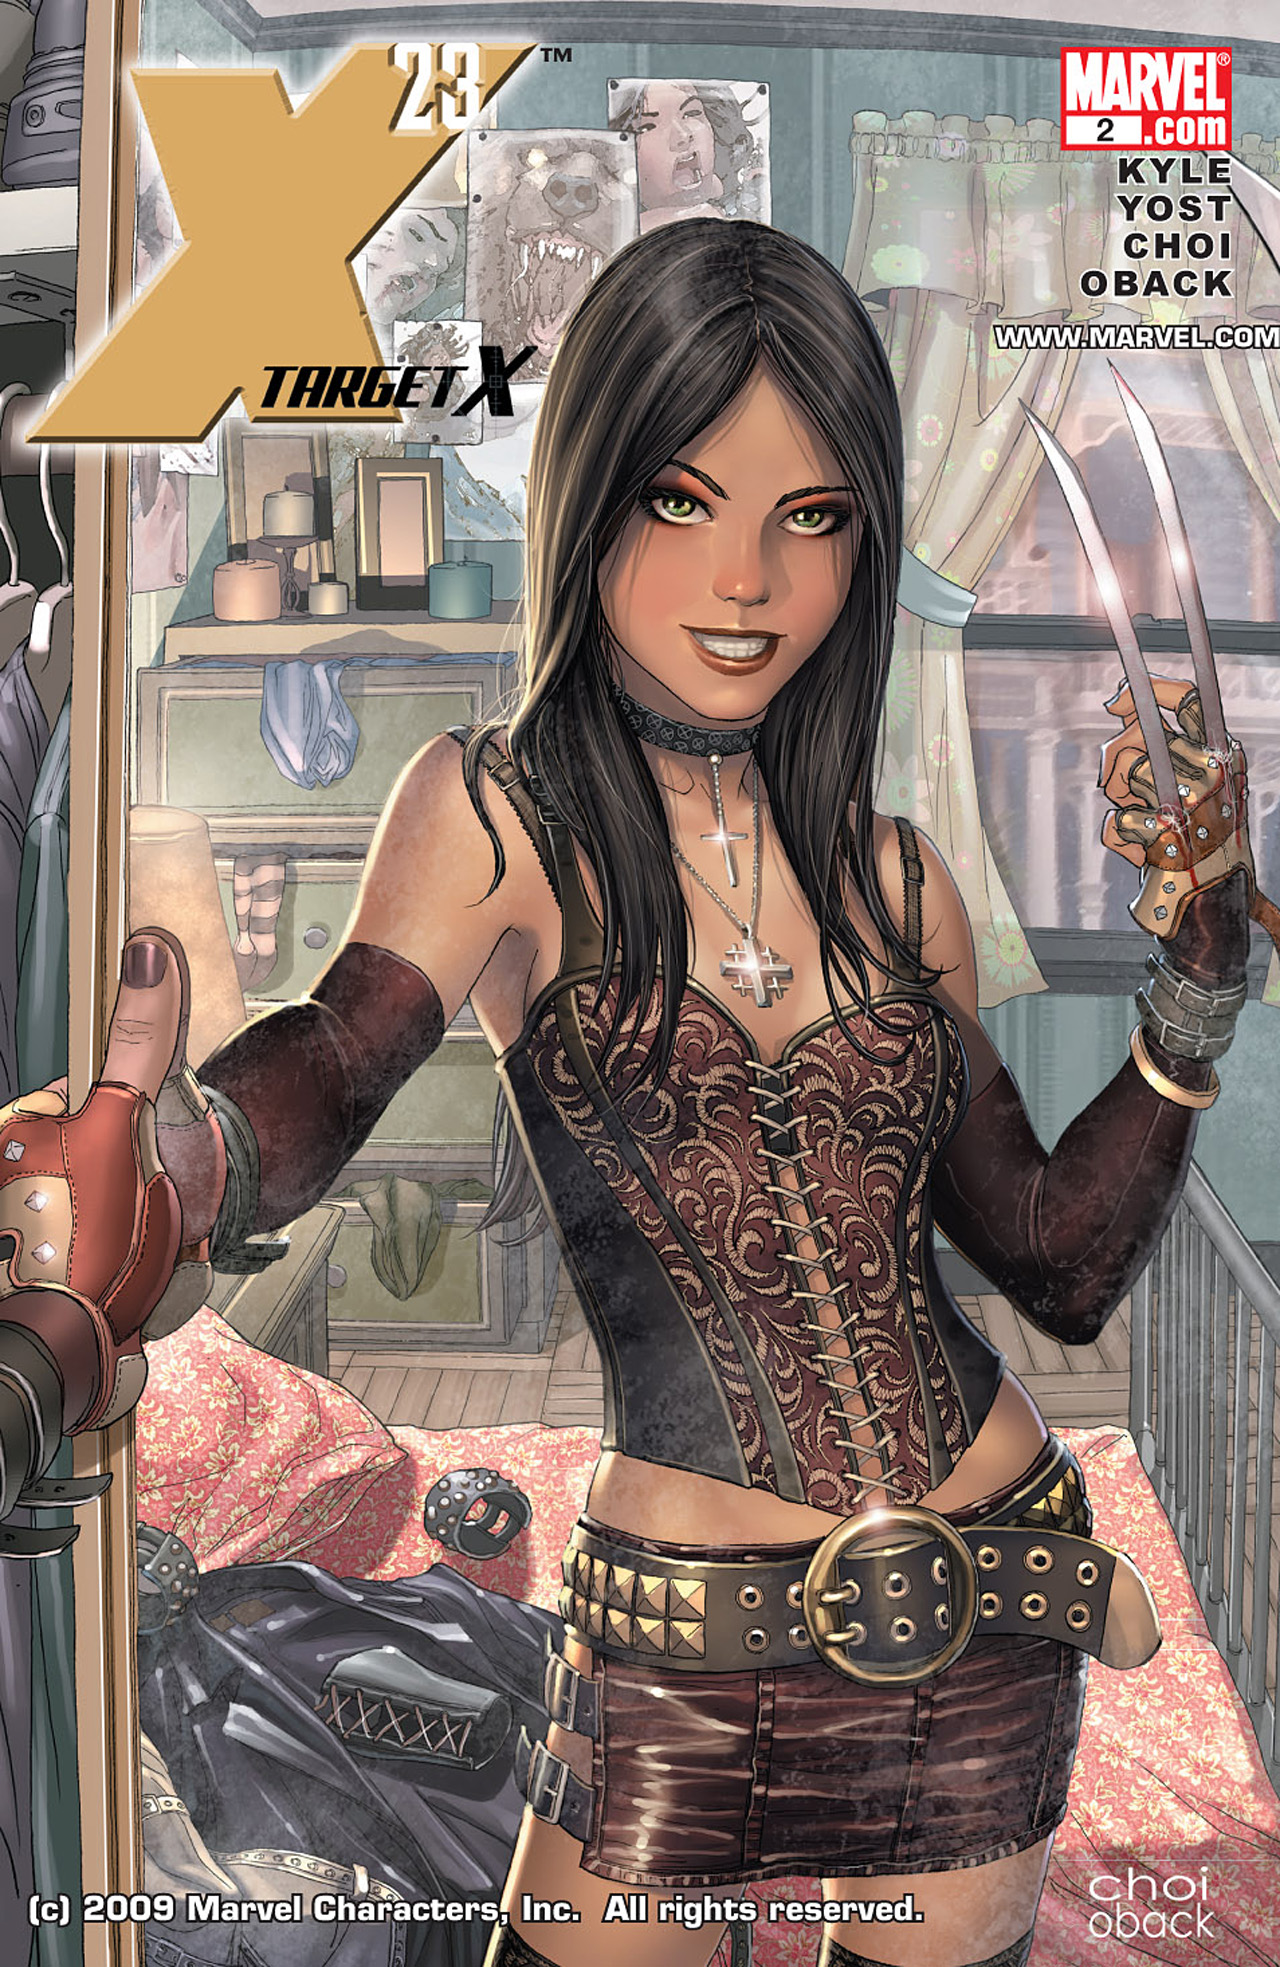 X 23 Target X Issue 2 Read X 23 Target X Issue 2 Comic Online In High Quality Read Full Comic